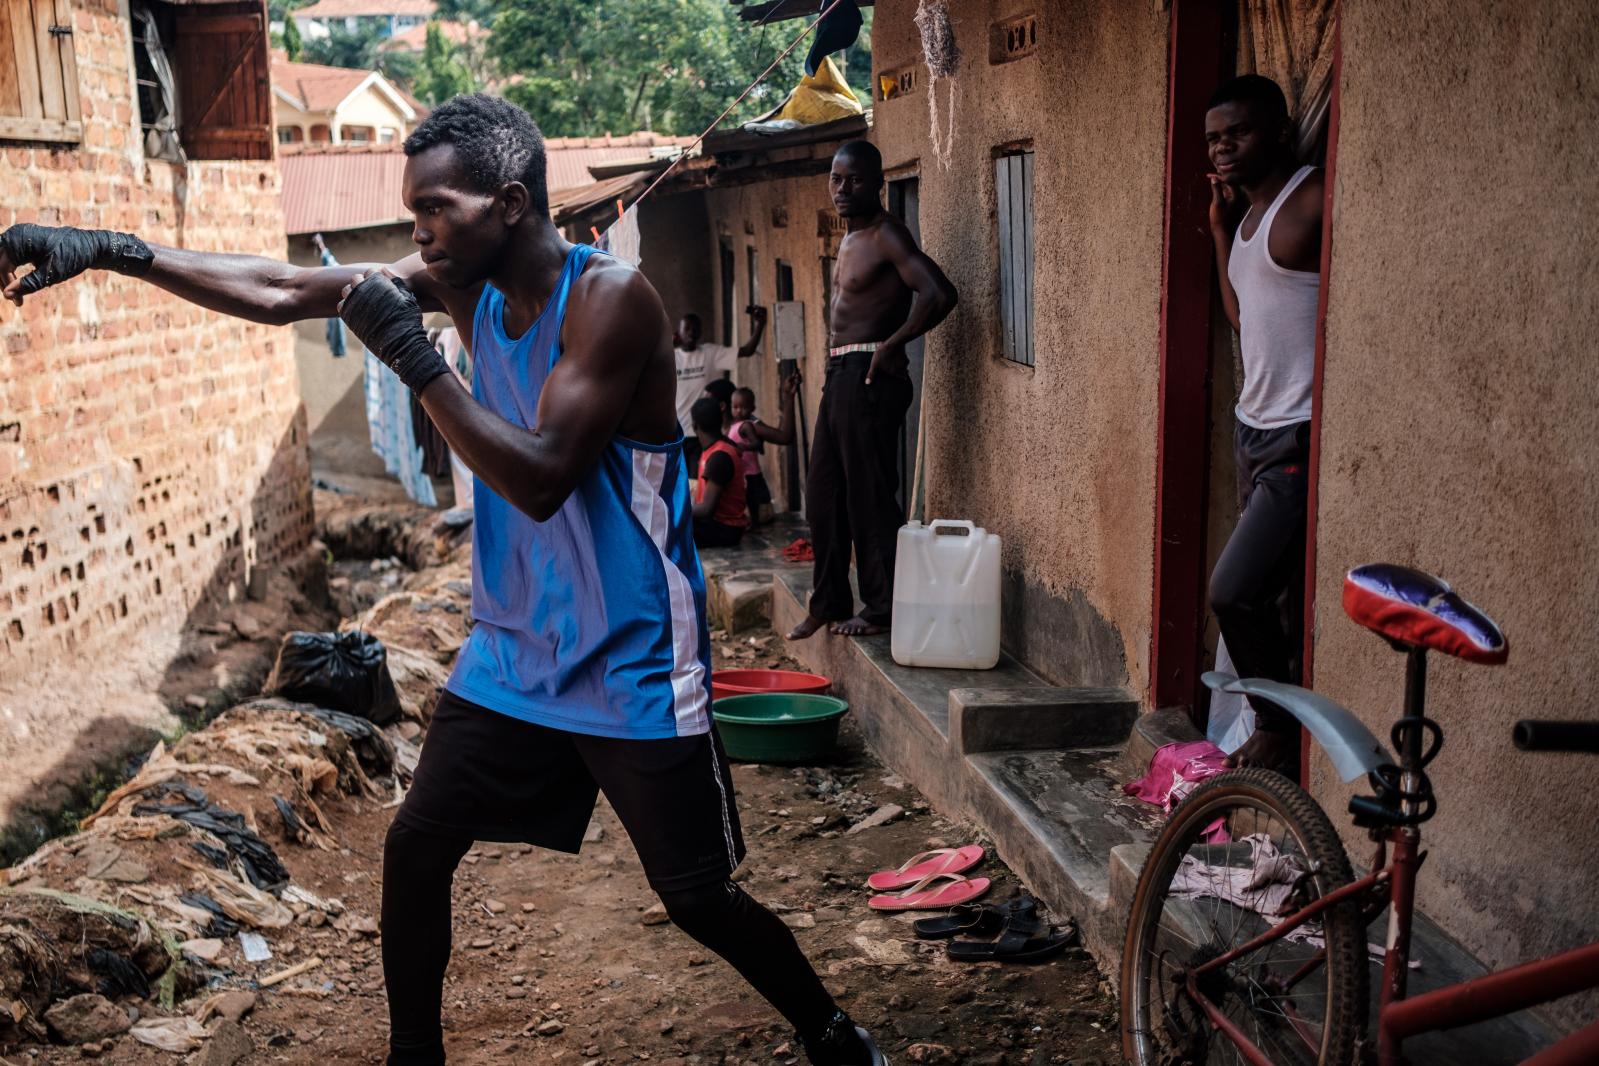 Joshua, 20, is a boxer who has ...ected 48 people in the country.